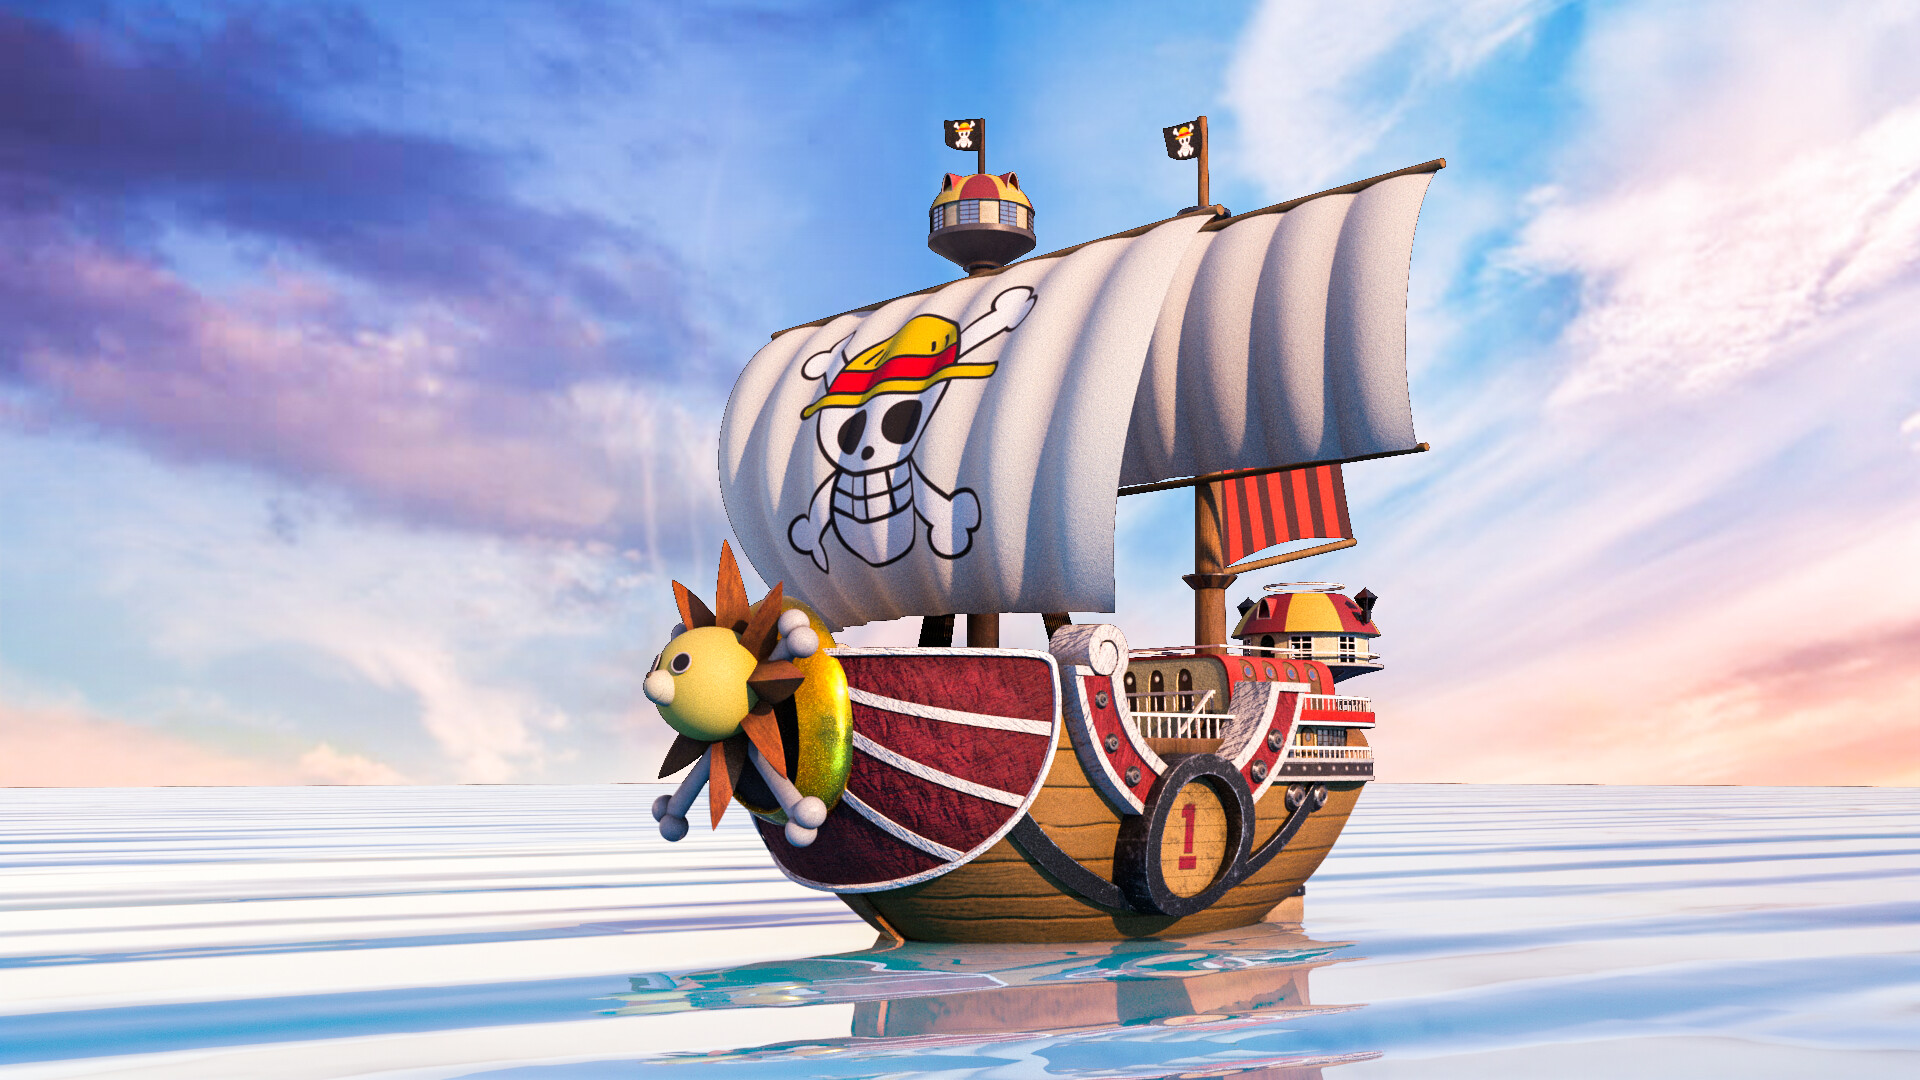 ArtStation - Thousand Sunny From One Piece